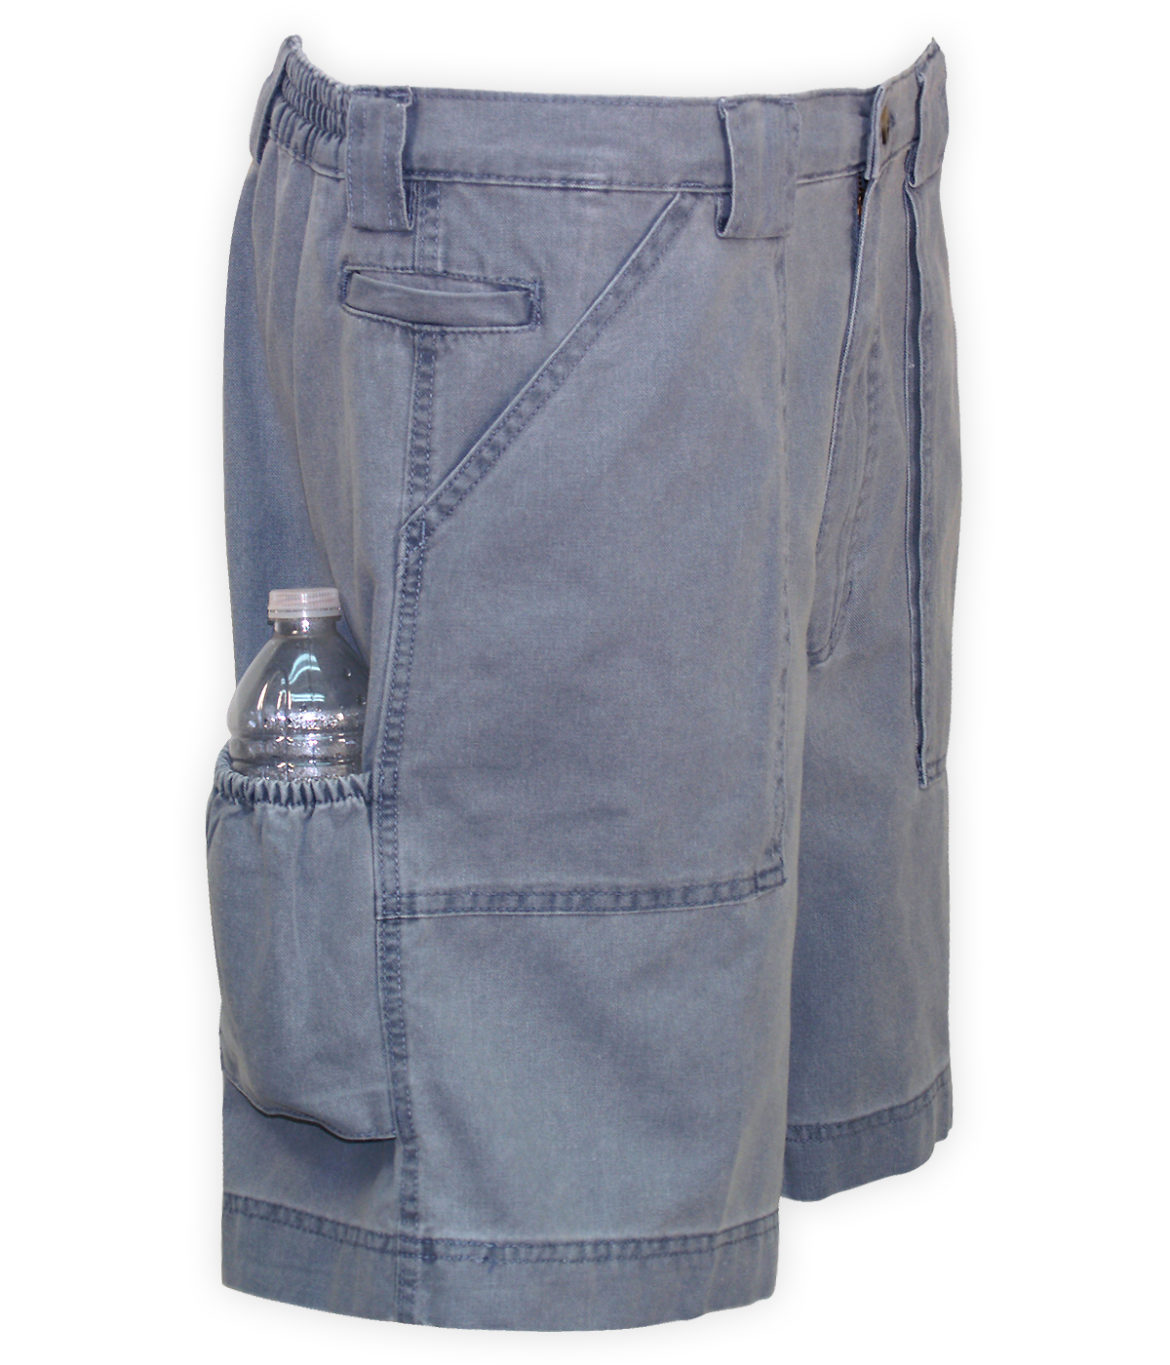 Hook & Tackle - Beer Can Island Long Neck Shorts - 4 colors (Size 32 - 42 )